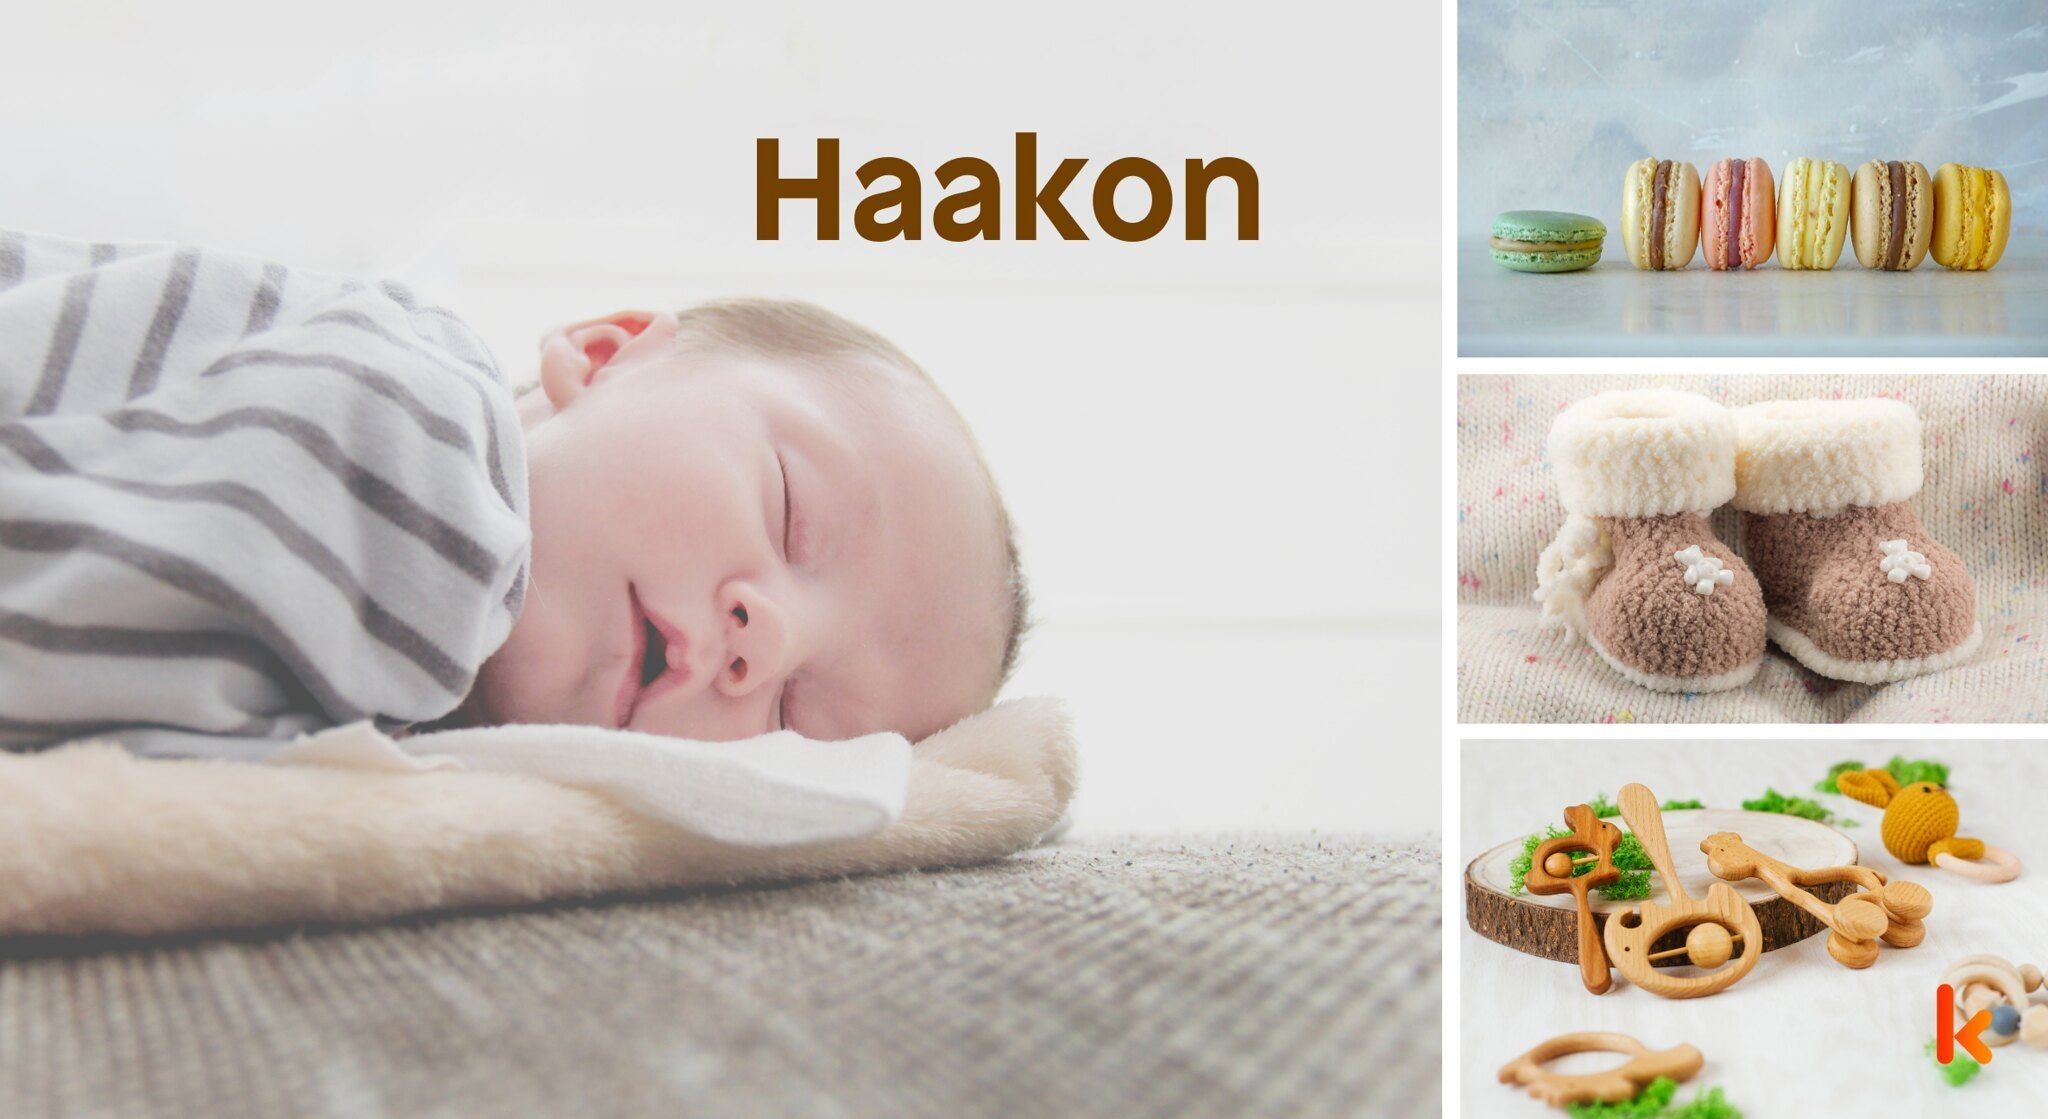 Meaning of the name Haakon